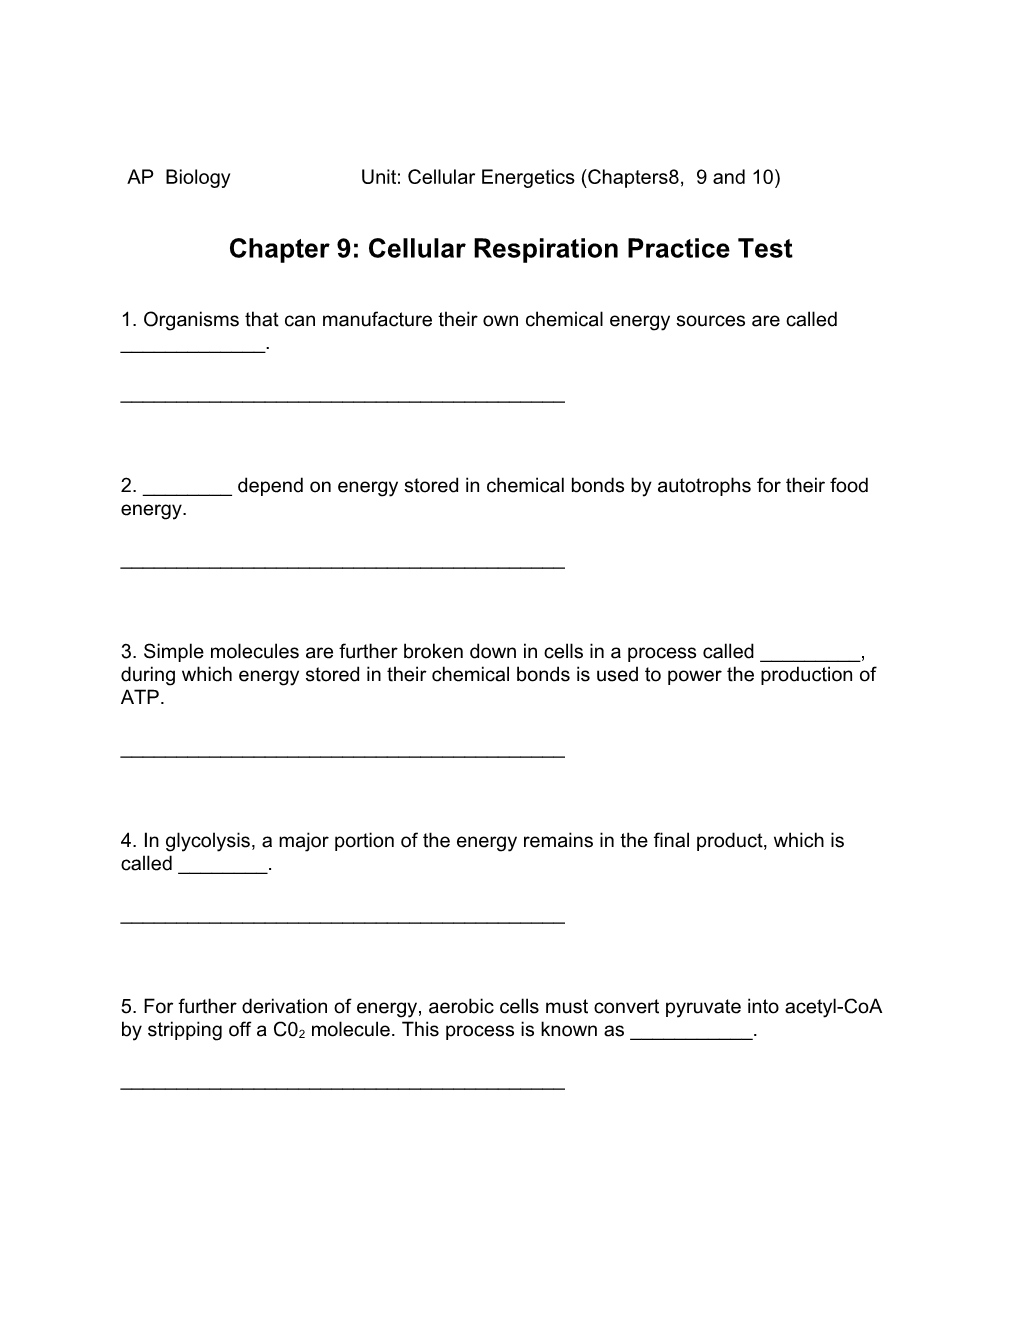 Chapter 9: Cellular Respiration Practice Test